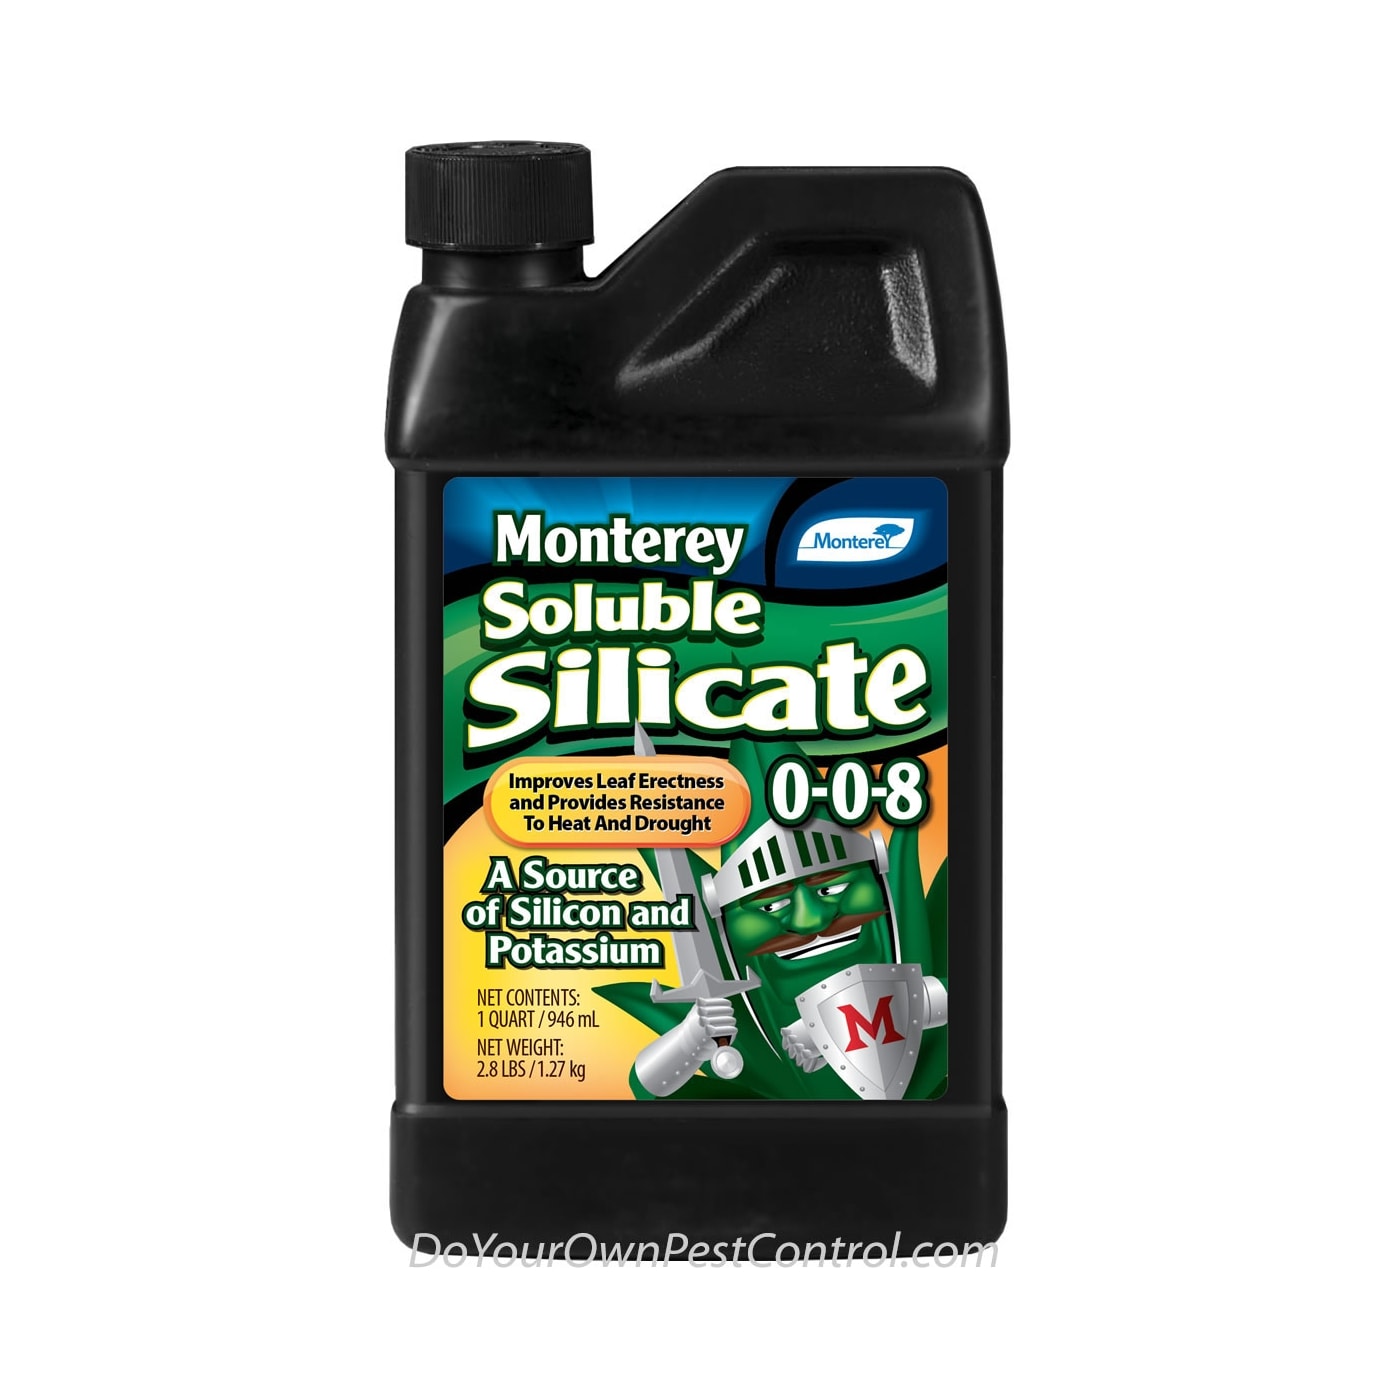 Monterey Soluble Silicate 0-0-8